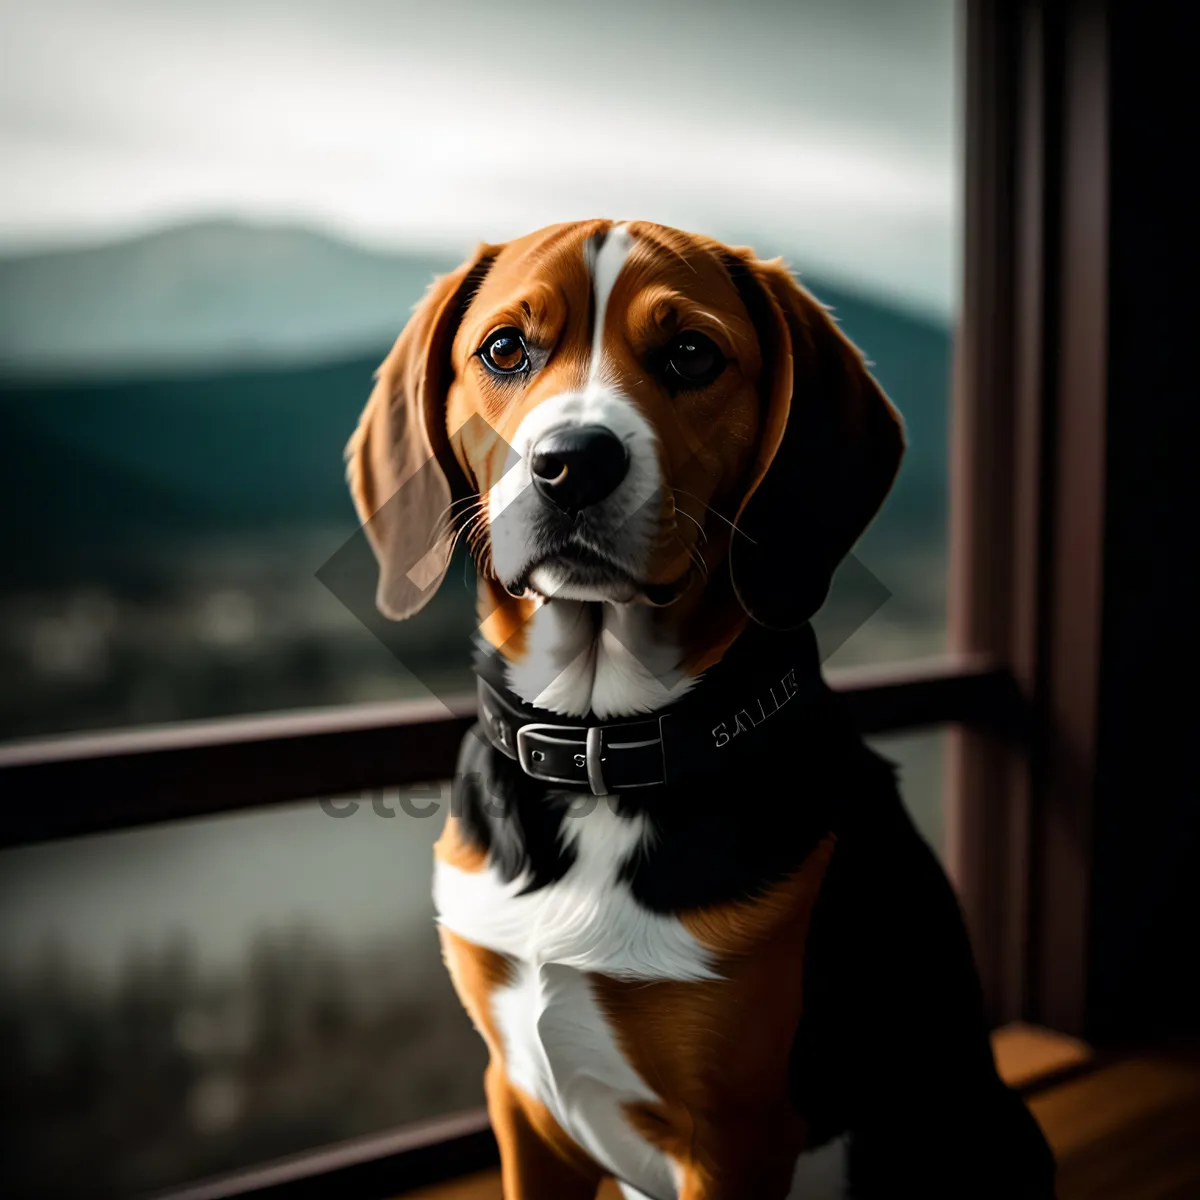 Picture of Pet Portrait: Purebred Beagle Puppy with Collar